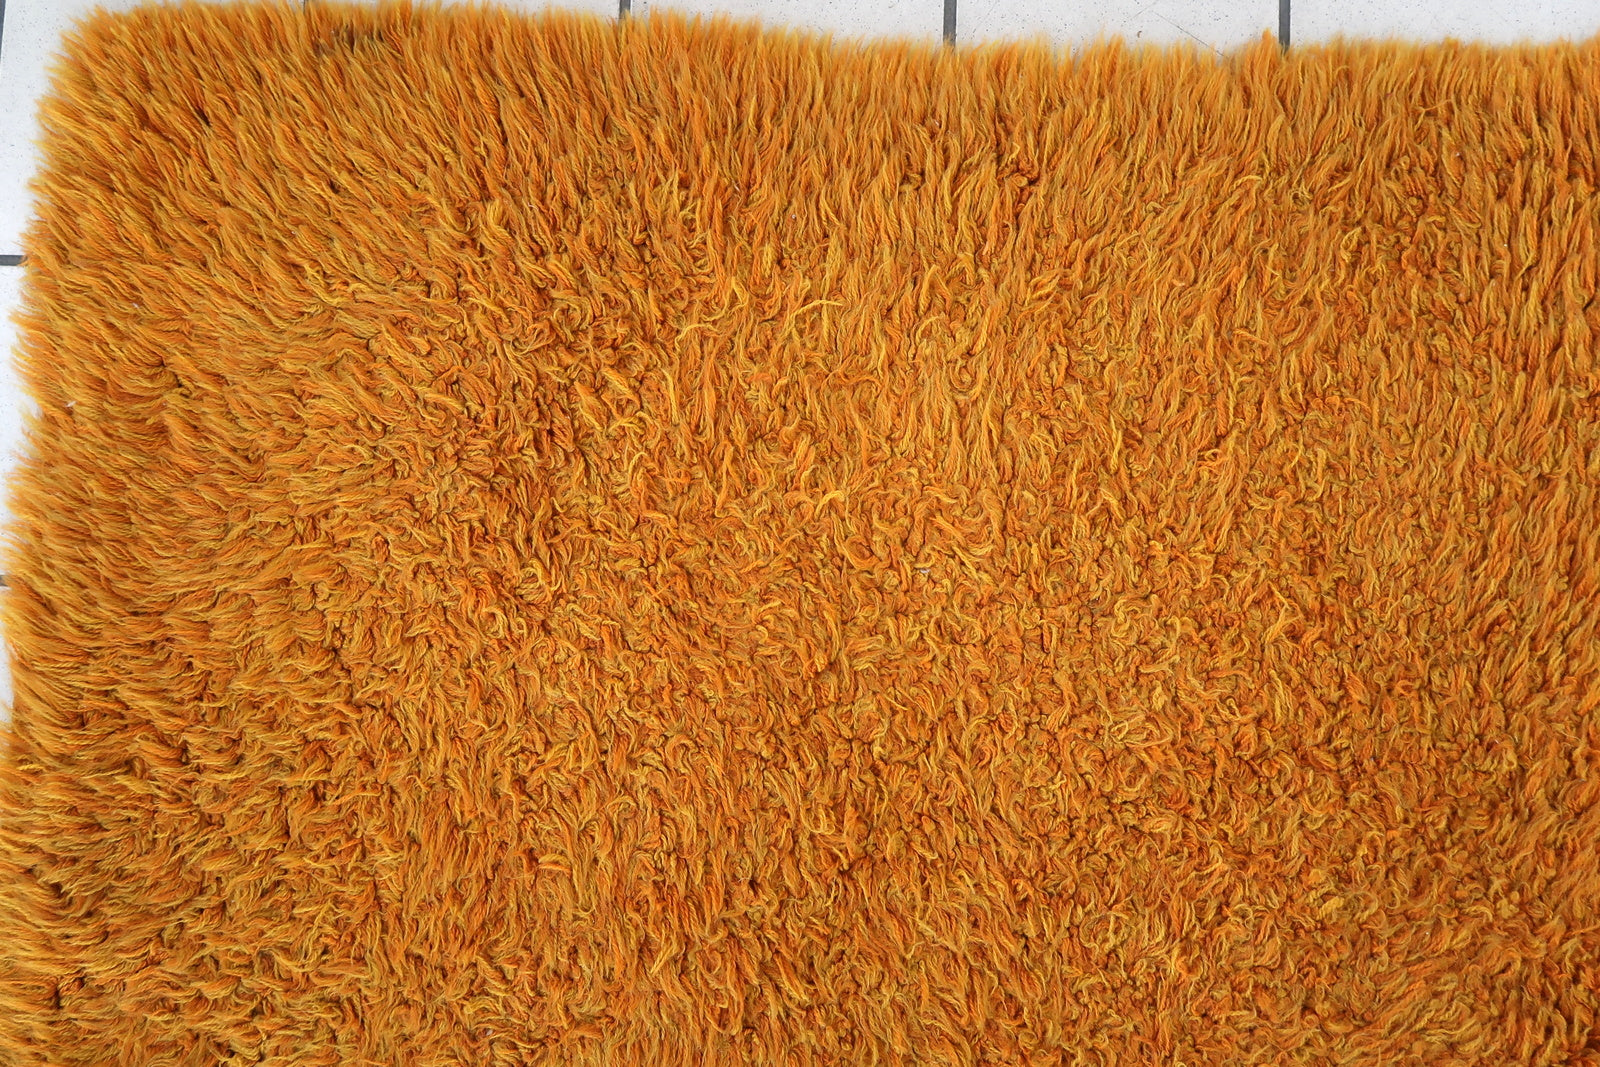 Handmade vintage Swedish Shag rug in original good condition. The rug is from the end of 20th century made in orange wool